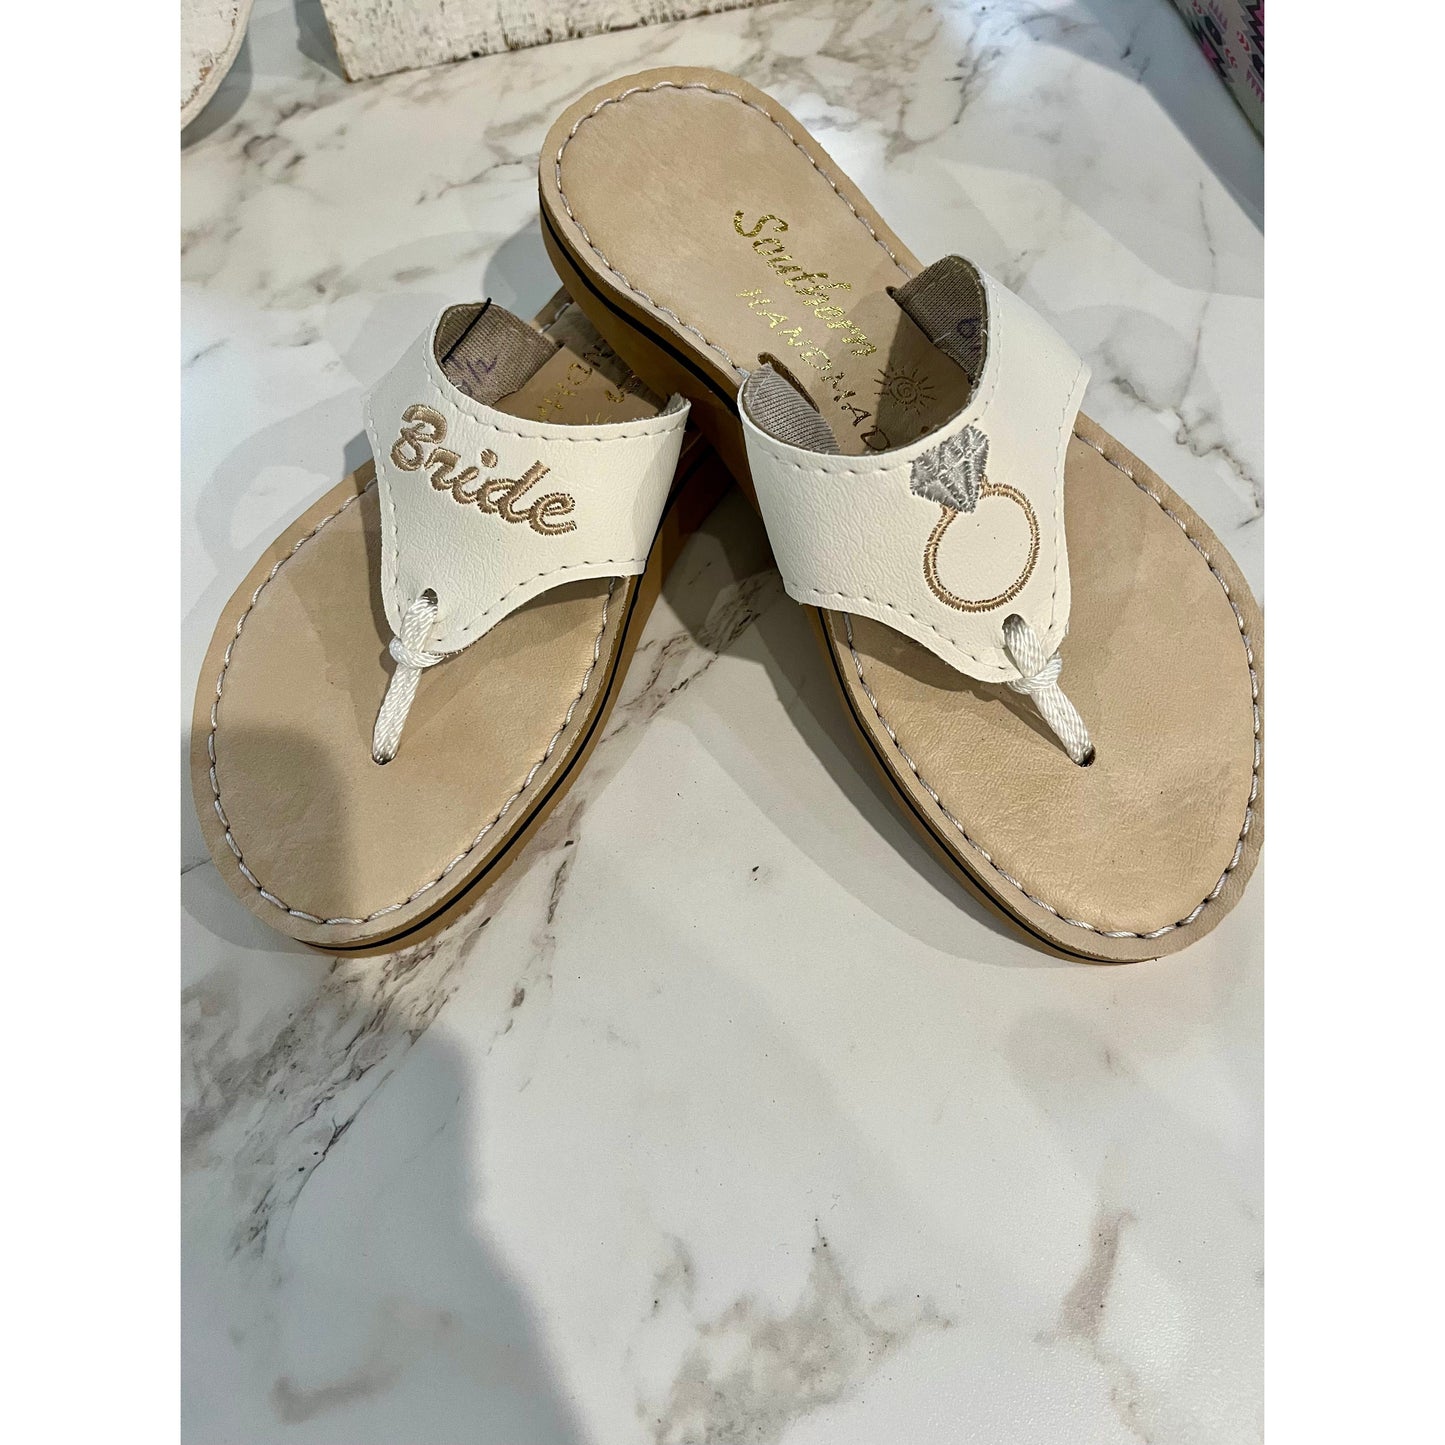 Handcrafted Bride Sandals with Arch Support